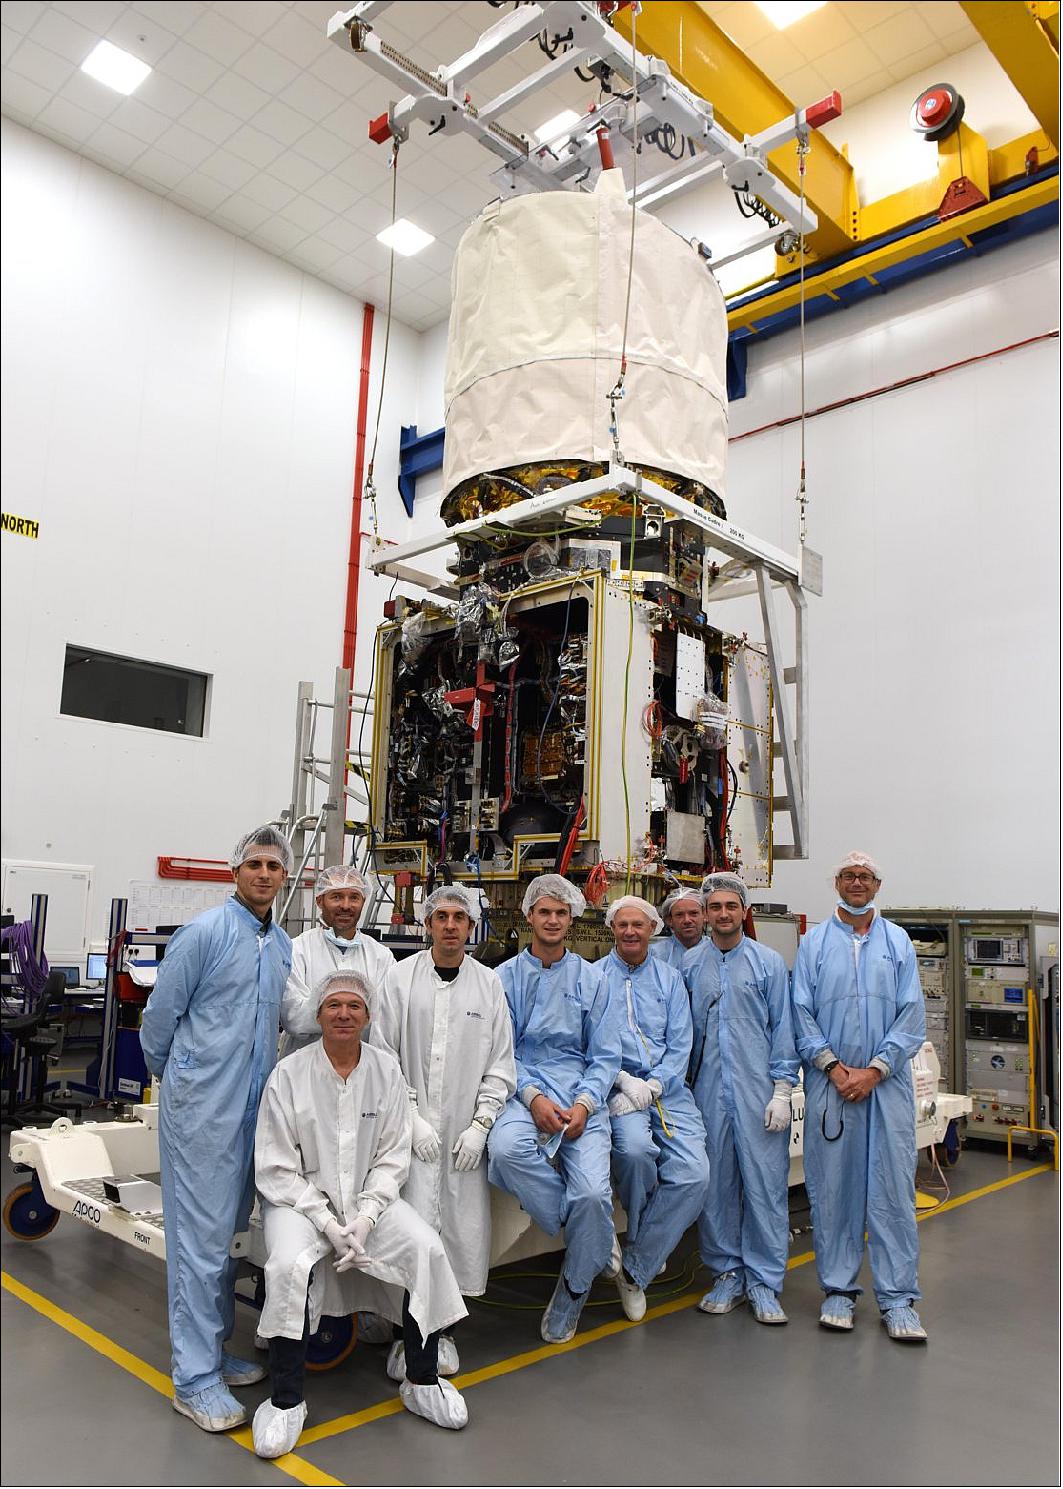 Figure 77: Standing proud: ESA’s Aeolus satellite in the cleanroom at Airbus Defence and Space in Stevenage, UK. During the last half of 2016 the UK team with support of their colleagues from Toulouse in France worked tirelessly to integrate the ALADIN instrument into the satellite, to check that all is aligned and that the complete satellite is working flawlessly. As the sole measuring instrument on the Aeolus satellite, ALADIN comprises two powerful lasers, a large telescope and very sensitive receivers. It is designed to probe the lowermost 30 km of the atmosphere to provide profiles of wind, aerosols and clouds along the satellite’s orbital path (image credit: Airbus DS)